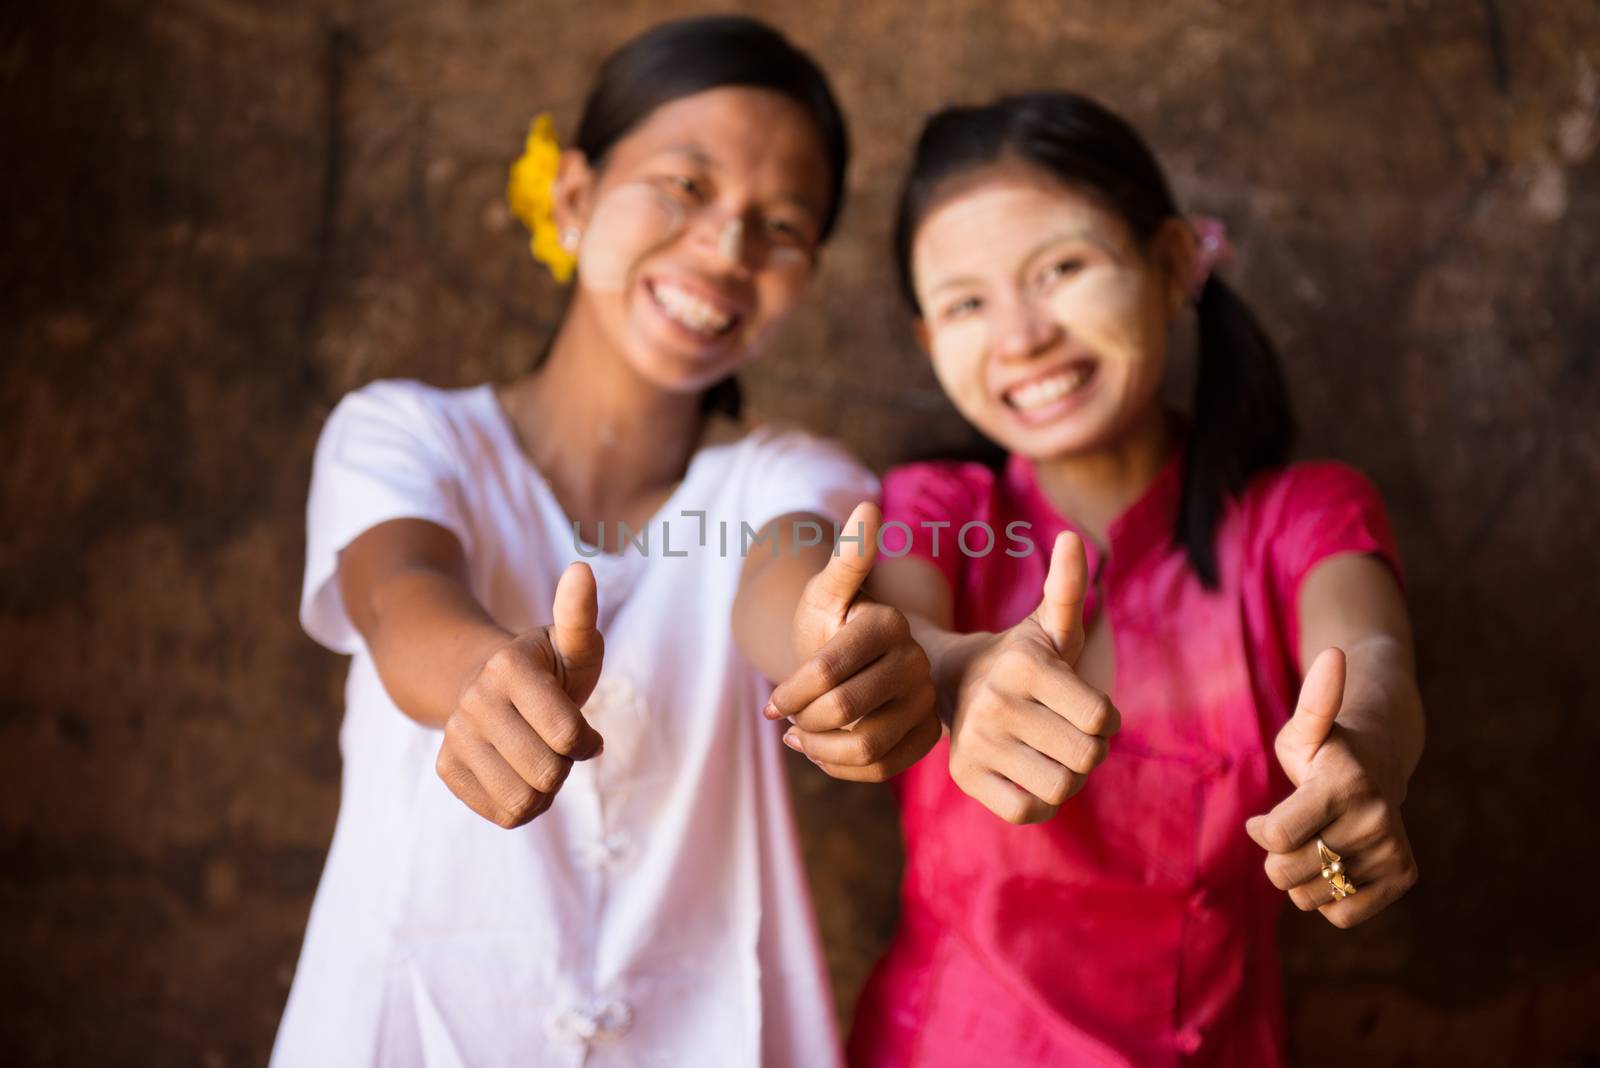 Portrait of two beautiful Myanmar girls smiling and giving thumb up.